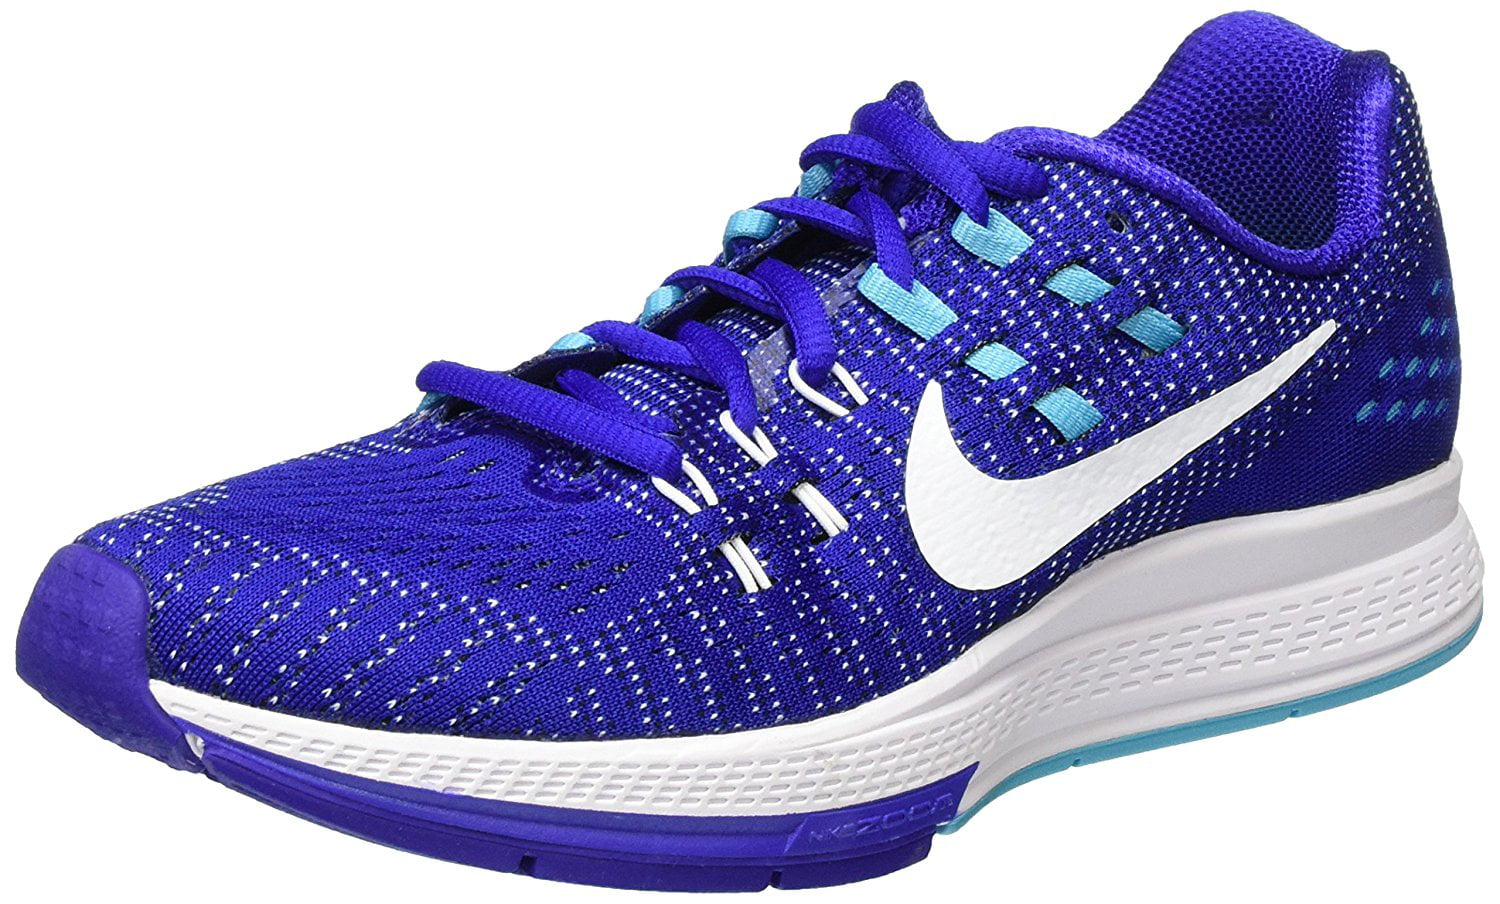 Ringback Adjustable Fly kite Nike Women's Air Zoom Structure 19 Running  Shoe-Concord/White-GammaBlue-Black - Walmart.com